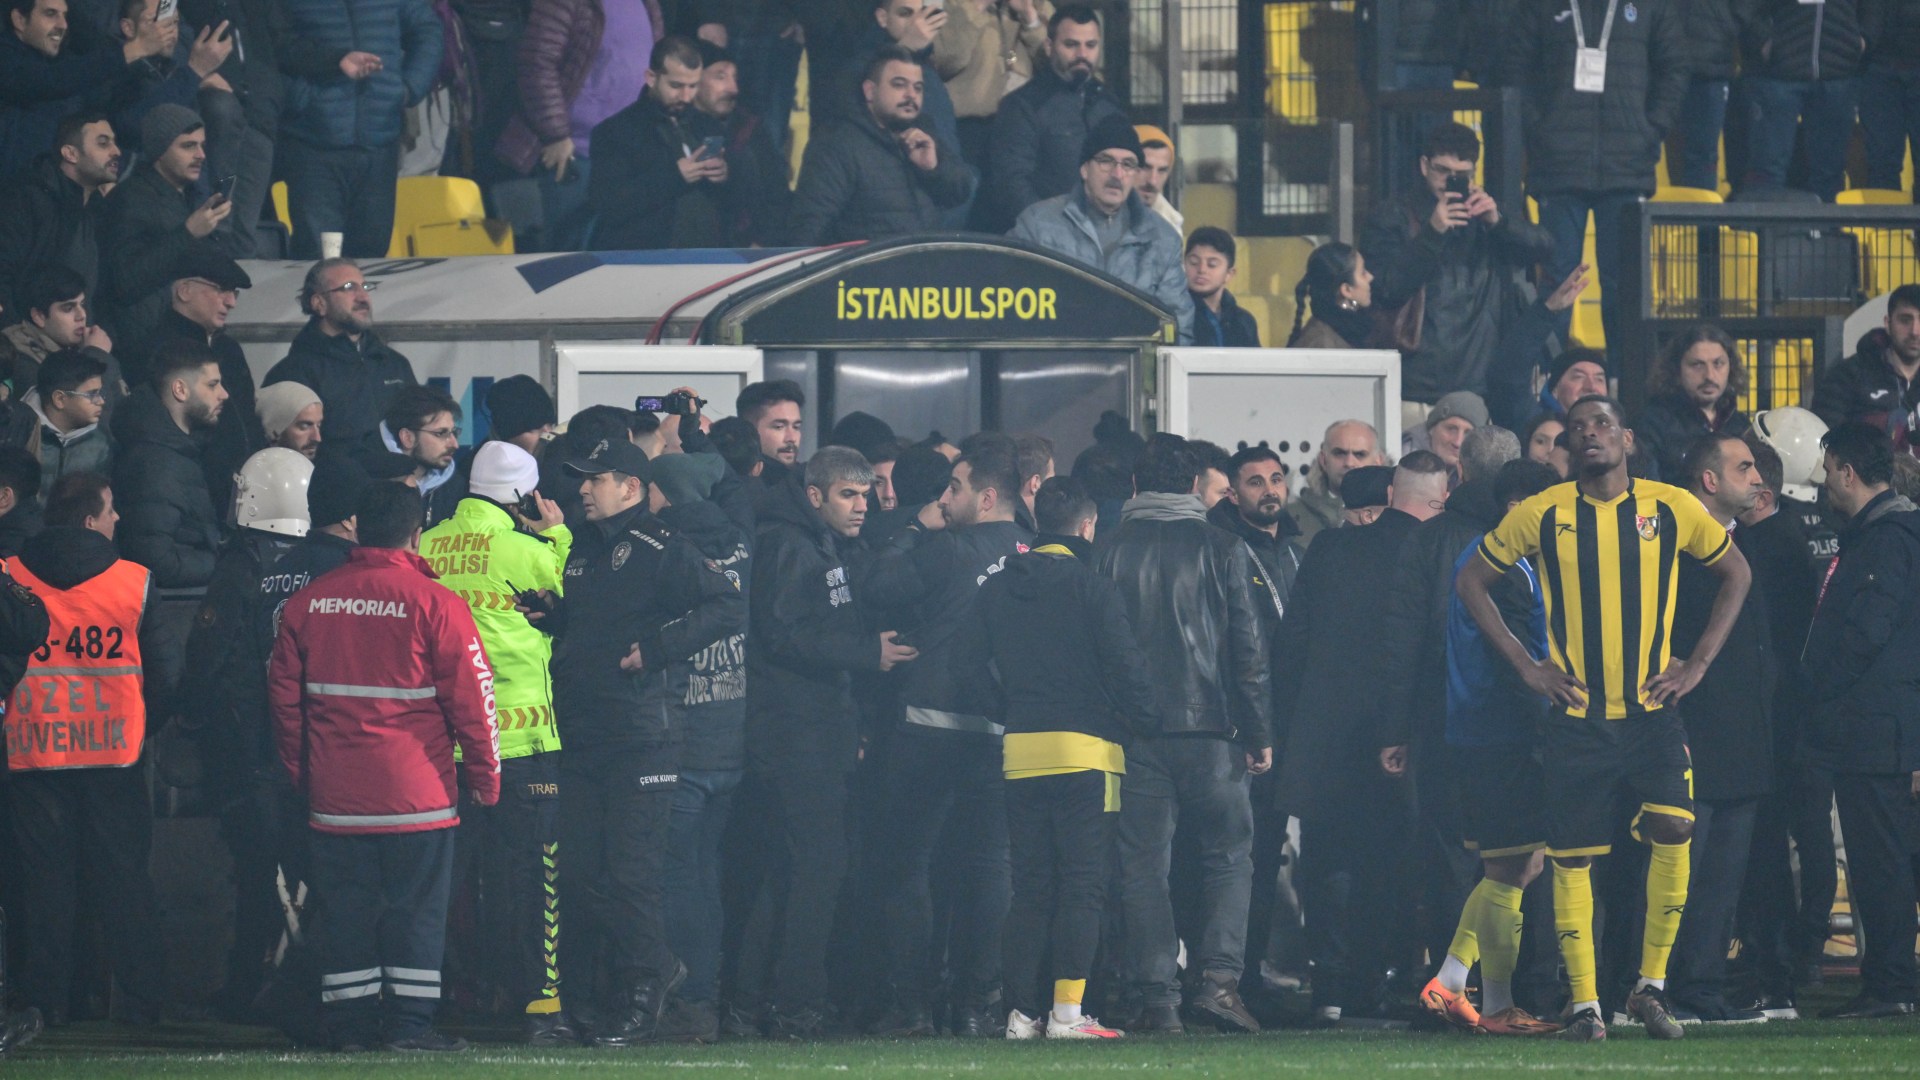 Club president storms pitch and takes team off in protest in more chaotic scenes at Turkish match... - talkSPORT